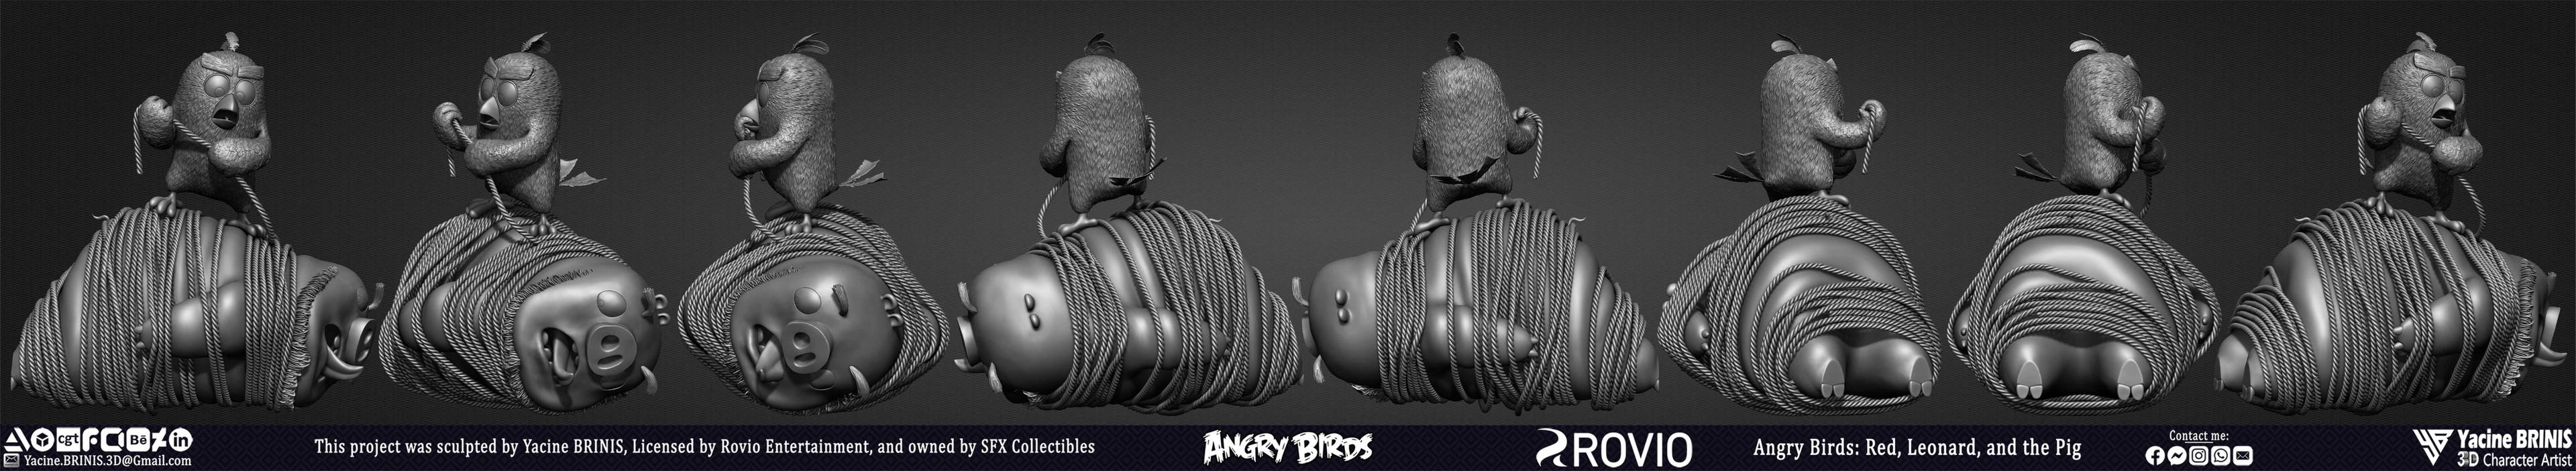 Red Leonard and the Pig Angry Birds Movie 2 Rovio Entertainment sculpted by Yacine BRINIS 005